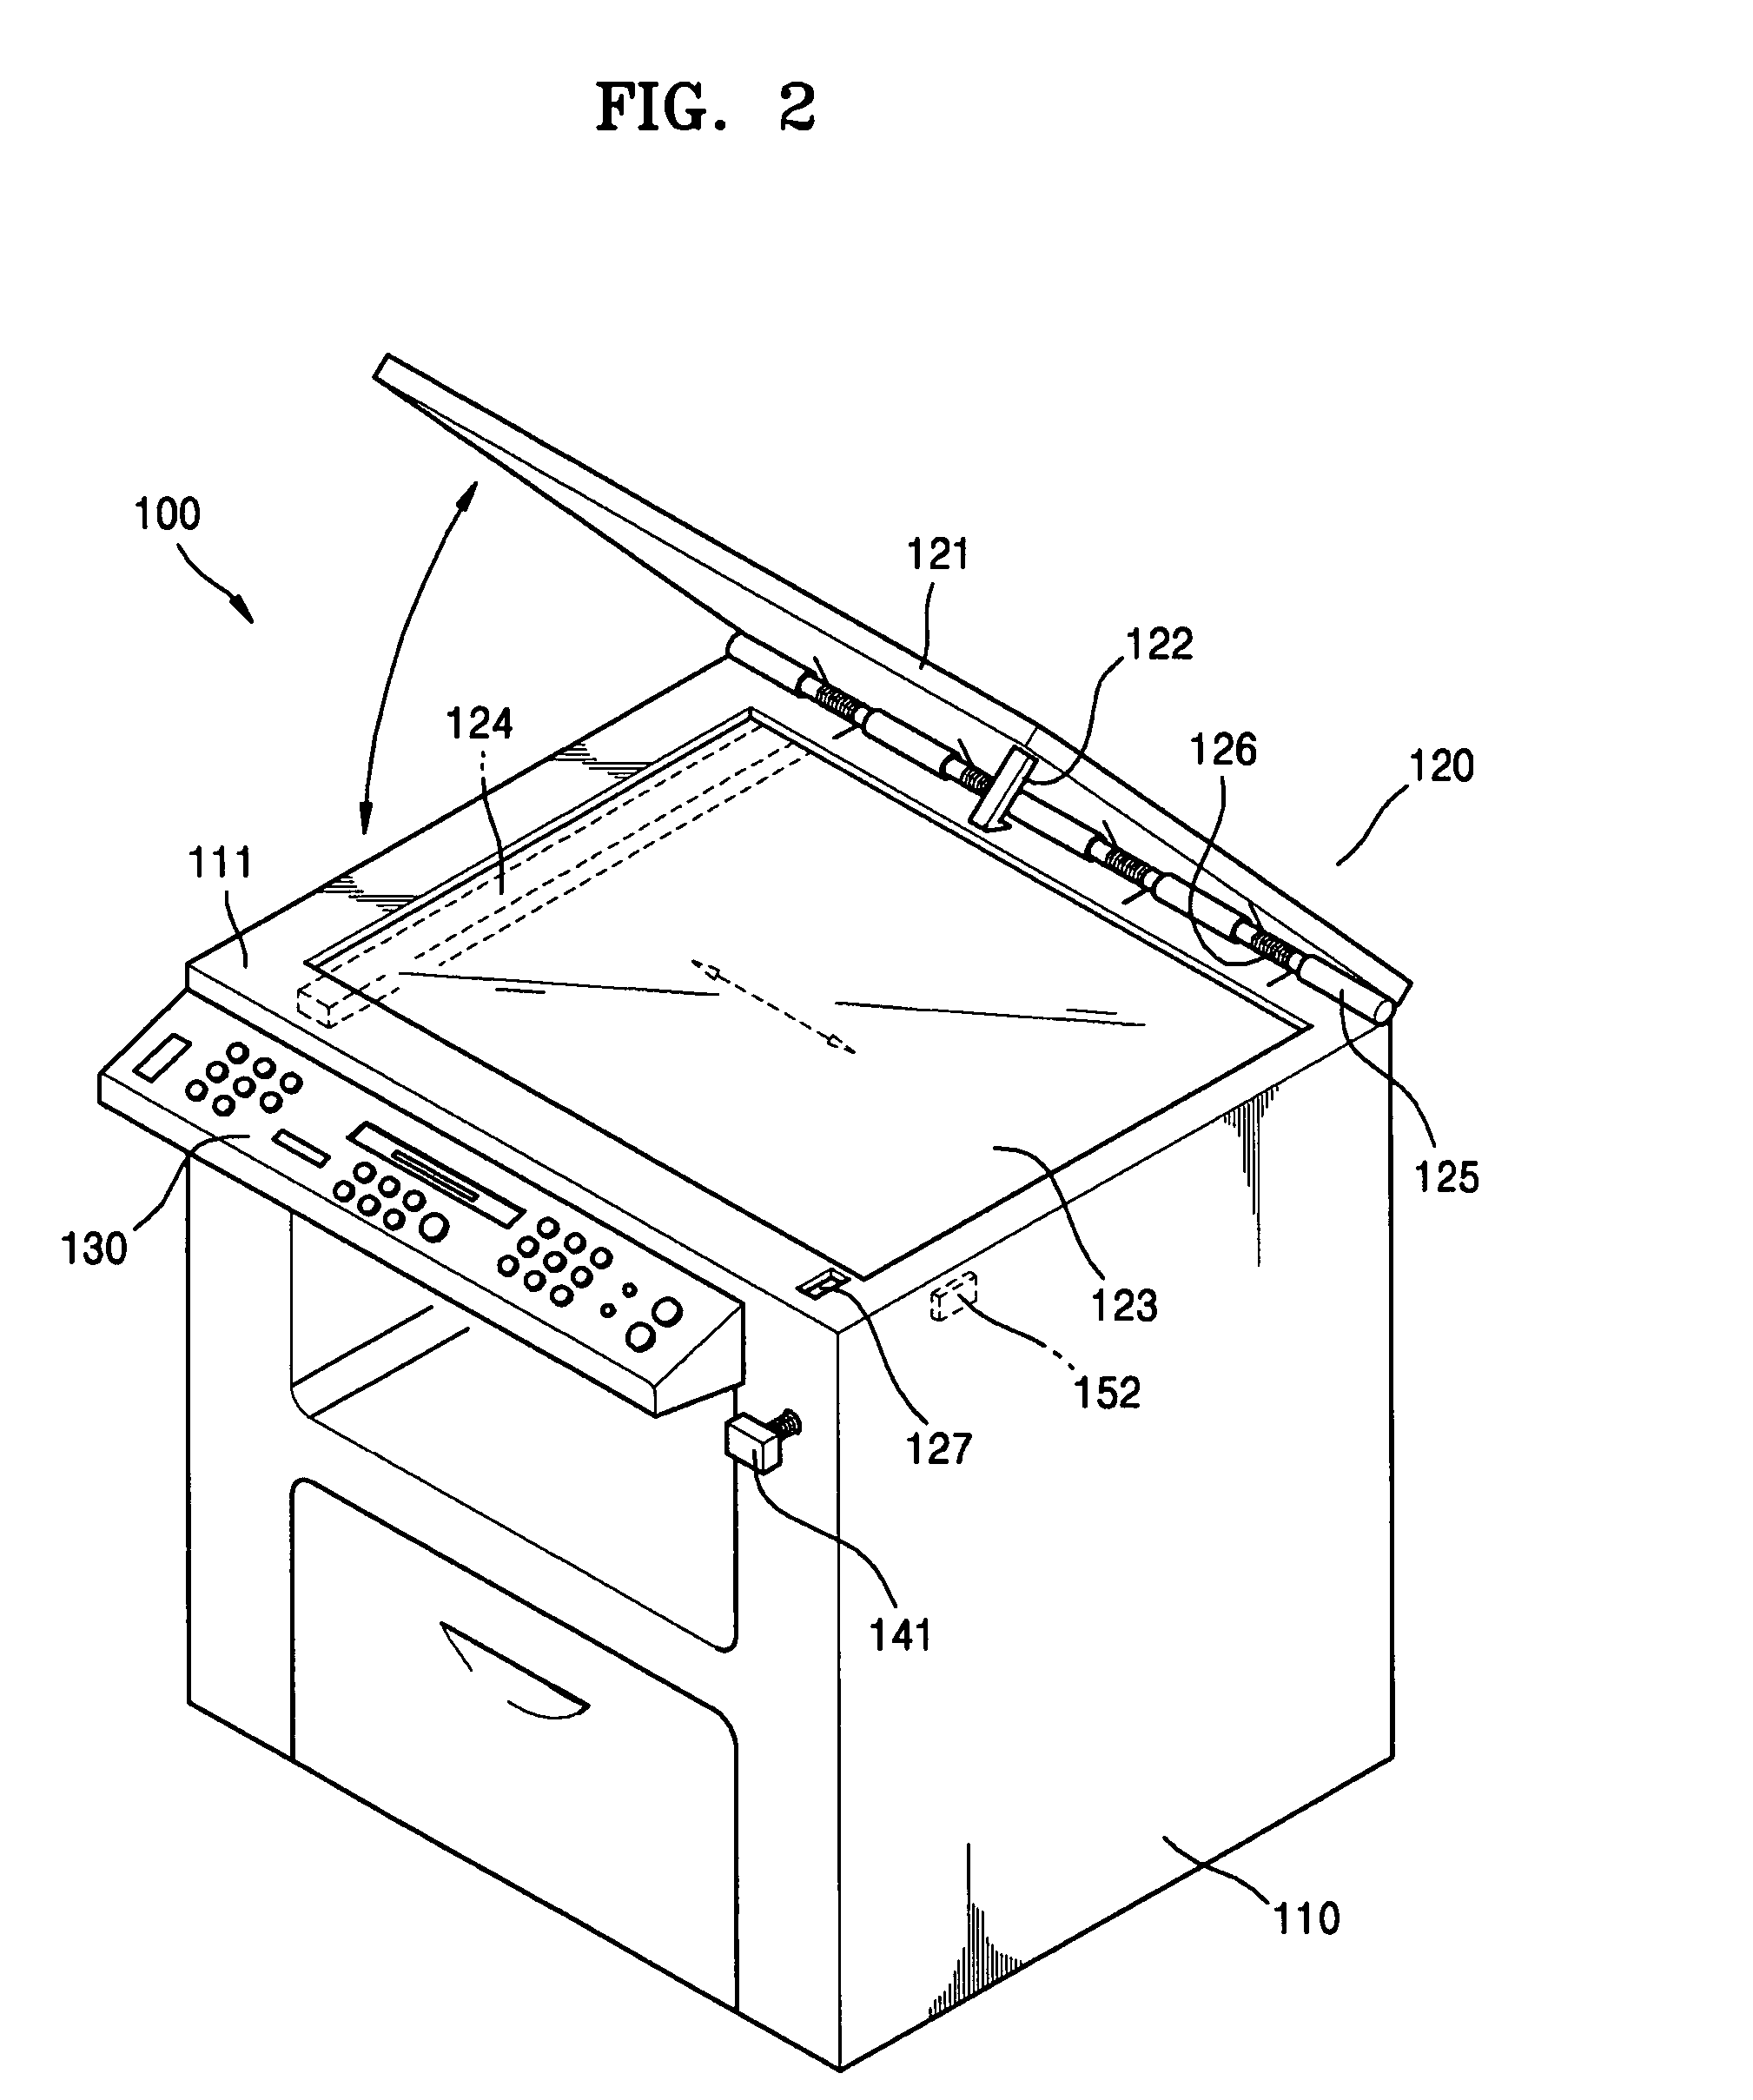 Multi-functional product having a releasing mechanism to activate the opening of a cover relative to a main body